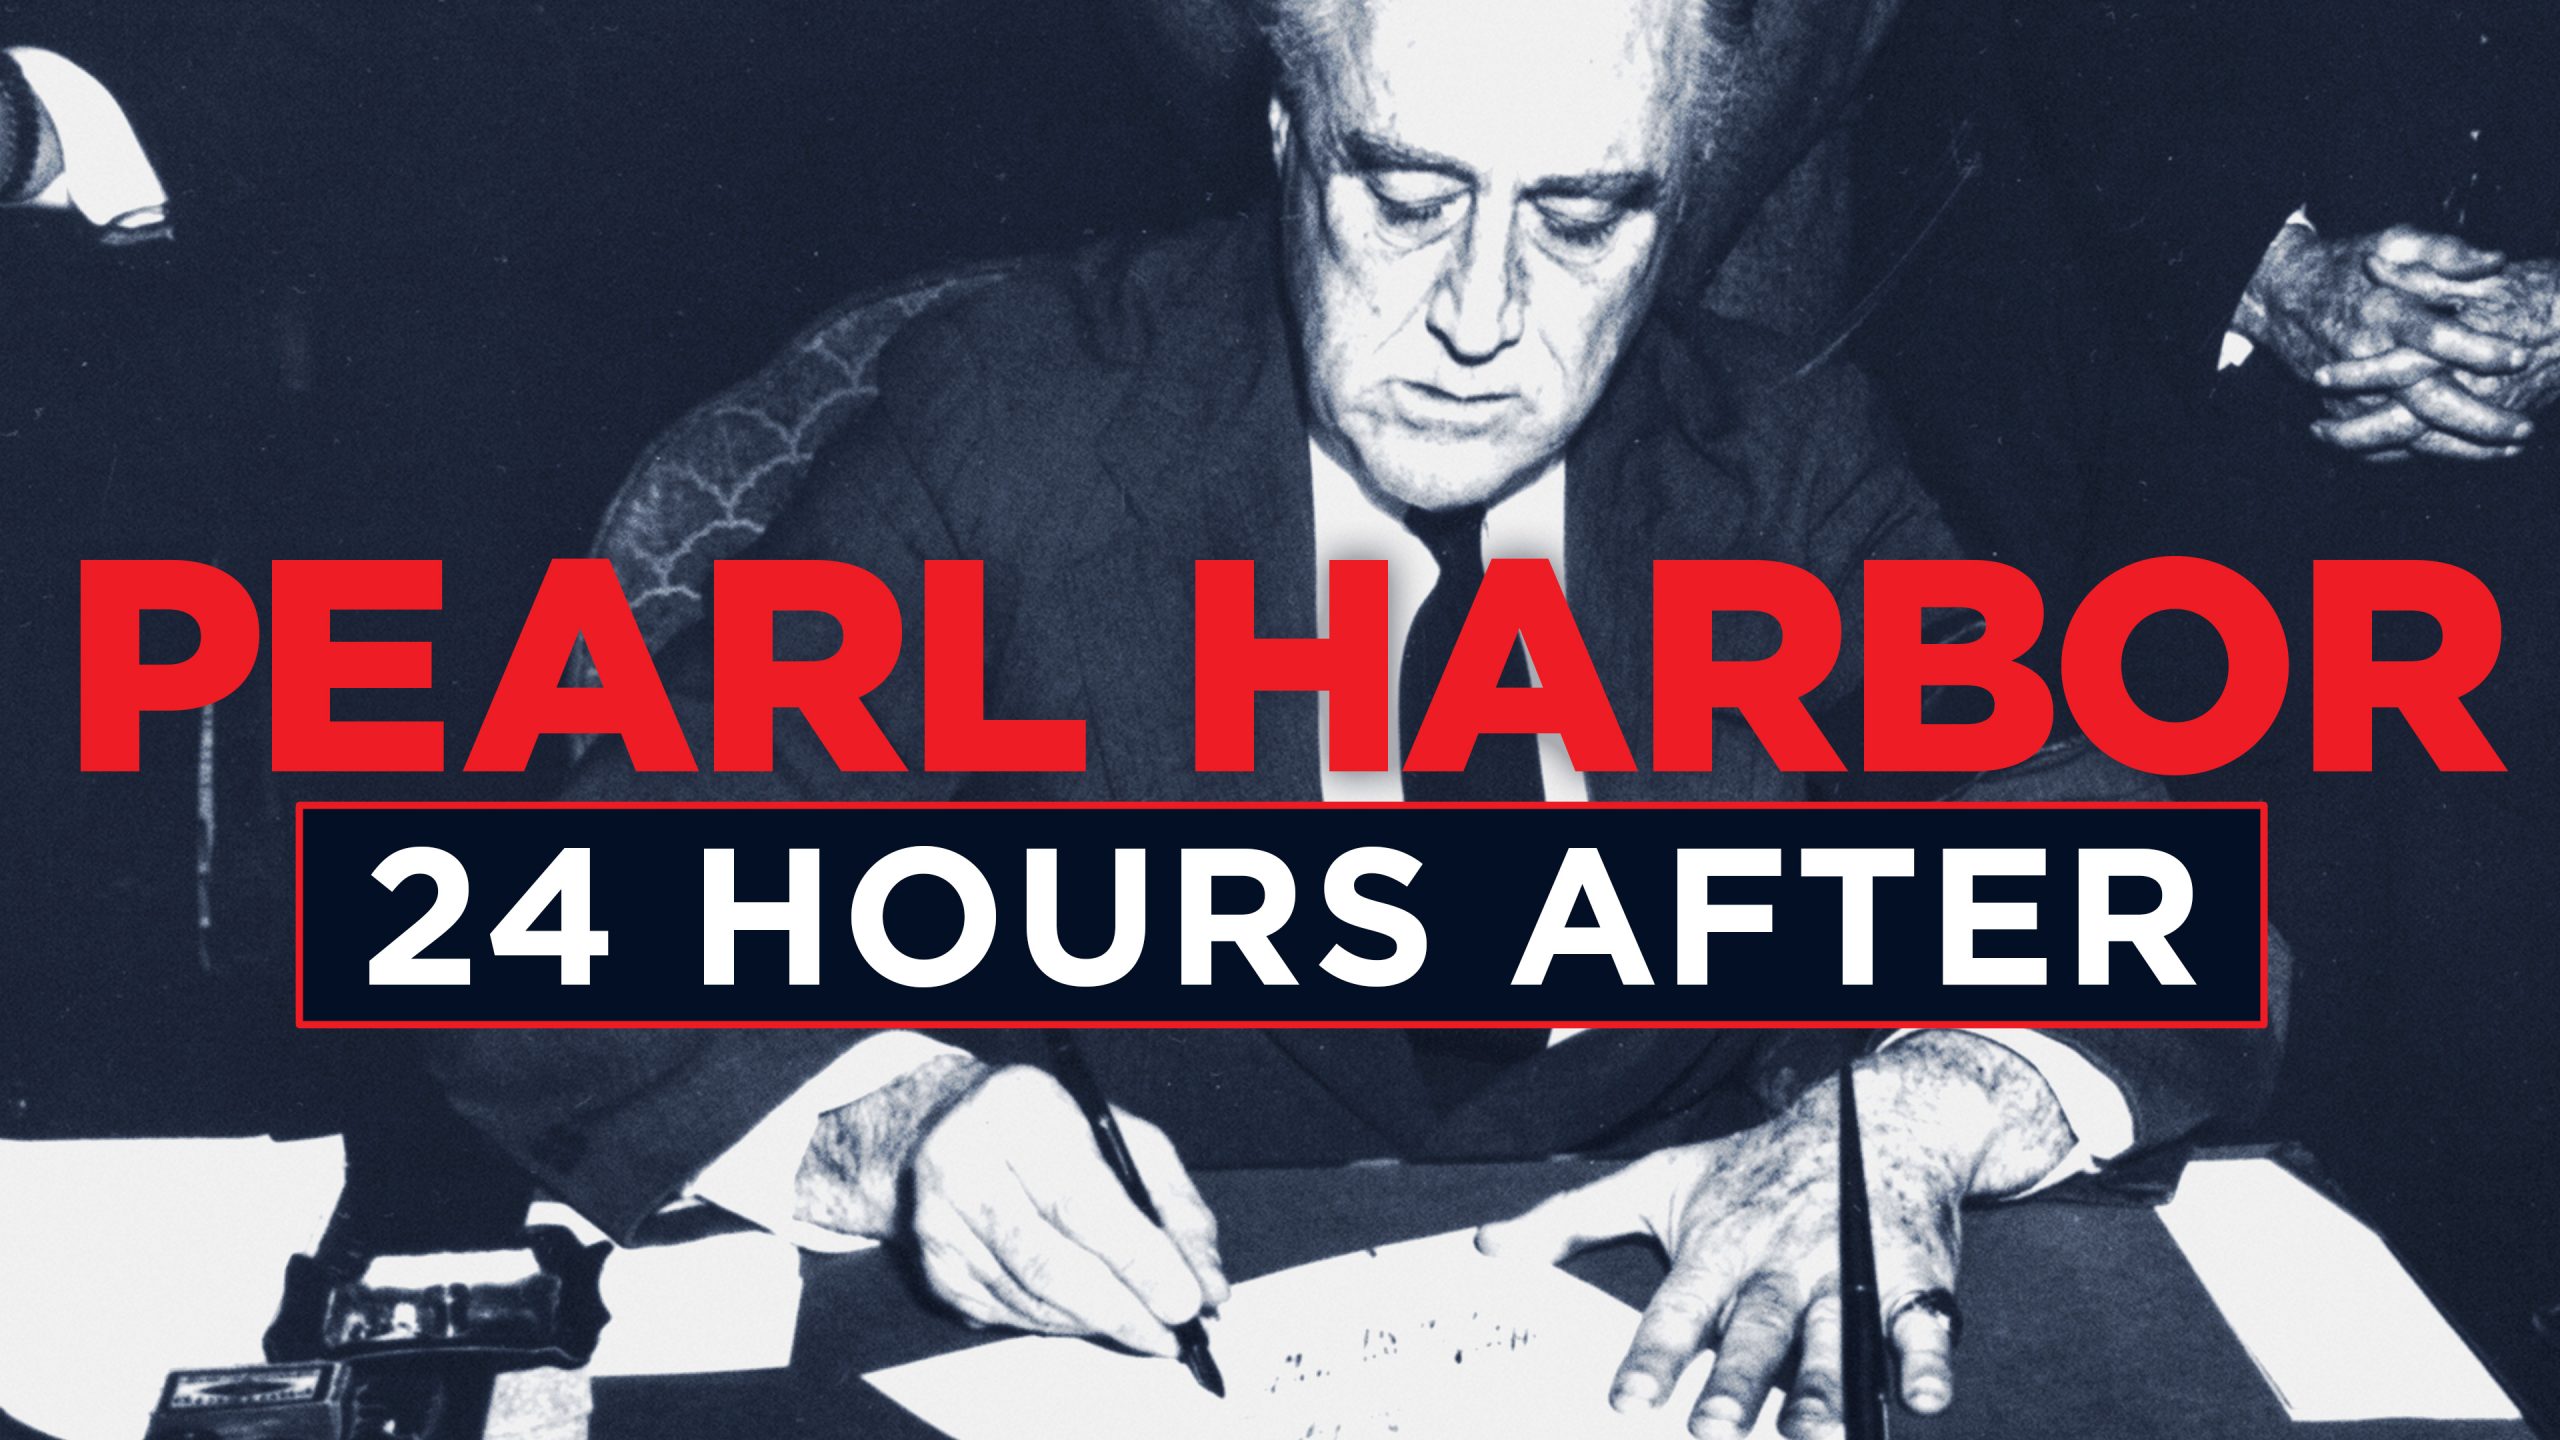 Watch 'Pearl Harbor: 24 Hours After' on HISTORY Vault